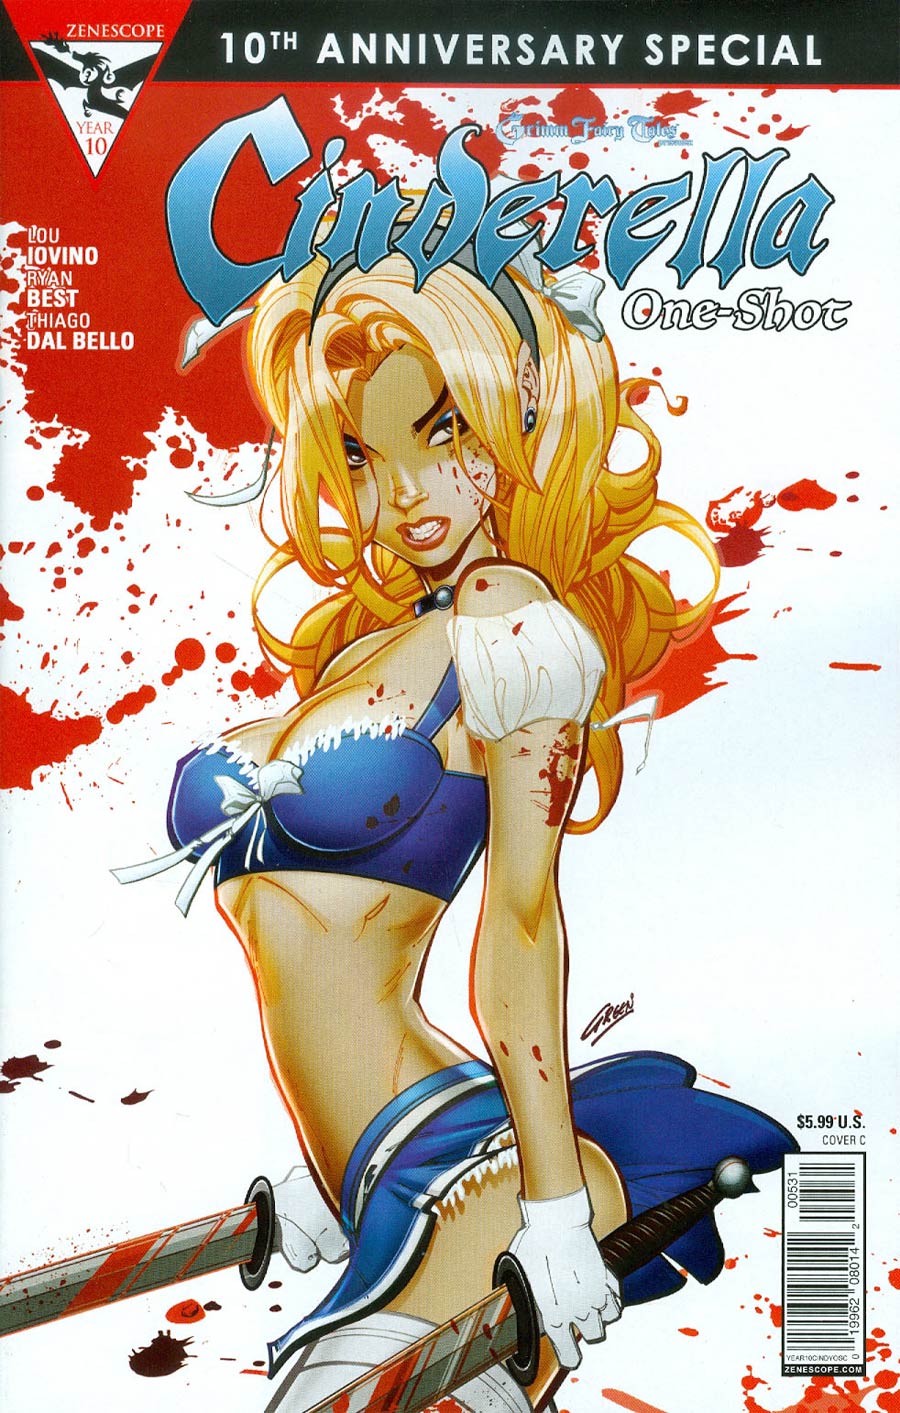 Grimm Fairy Tales Presents 10th Anniversary Special #5 Cinderella Cover C Paul Green